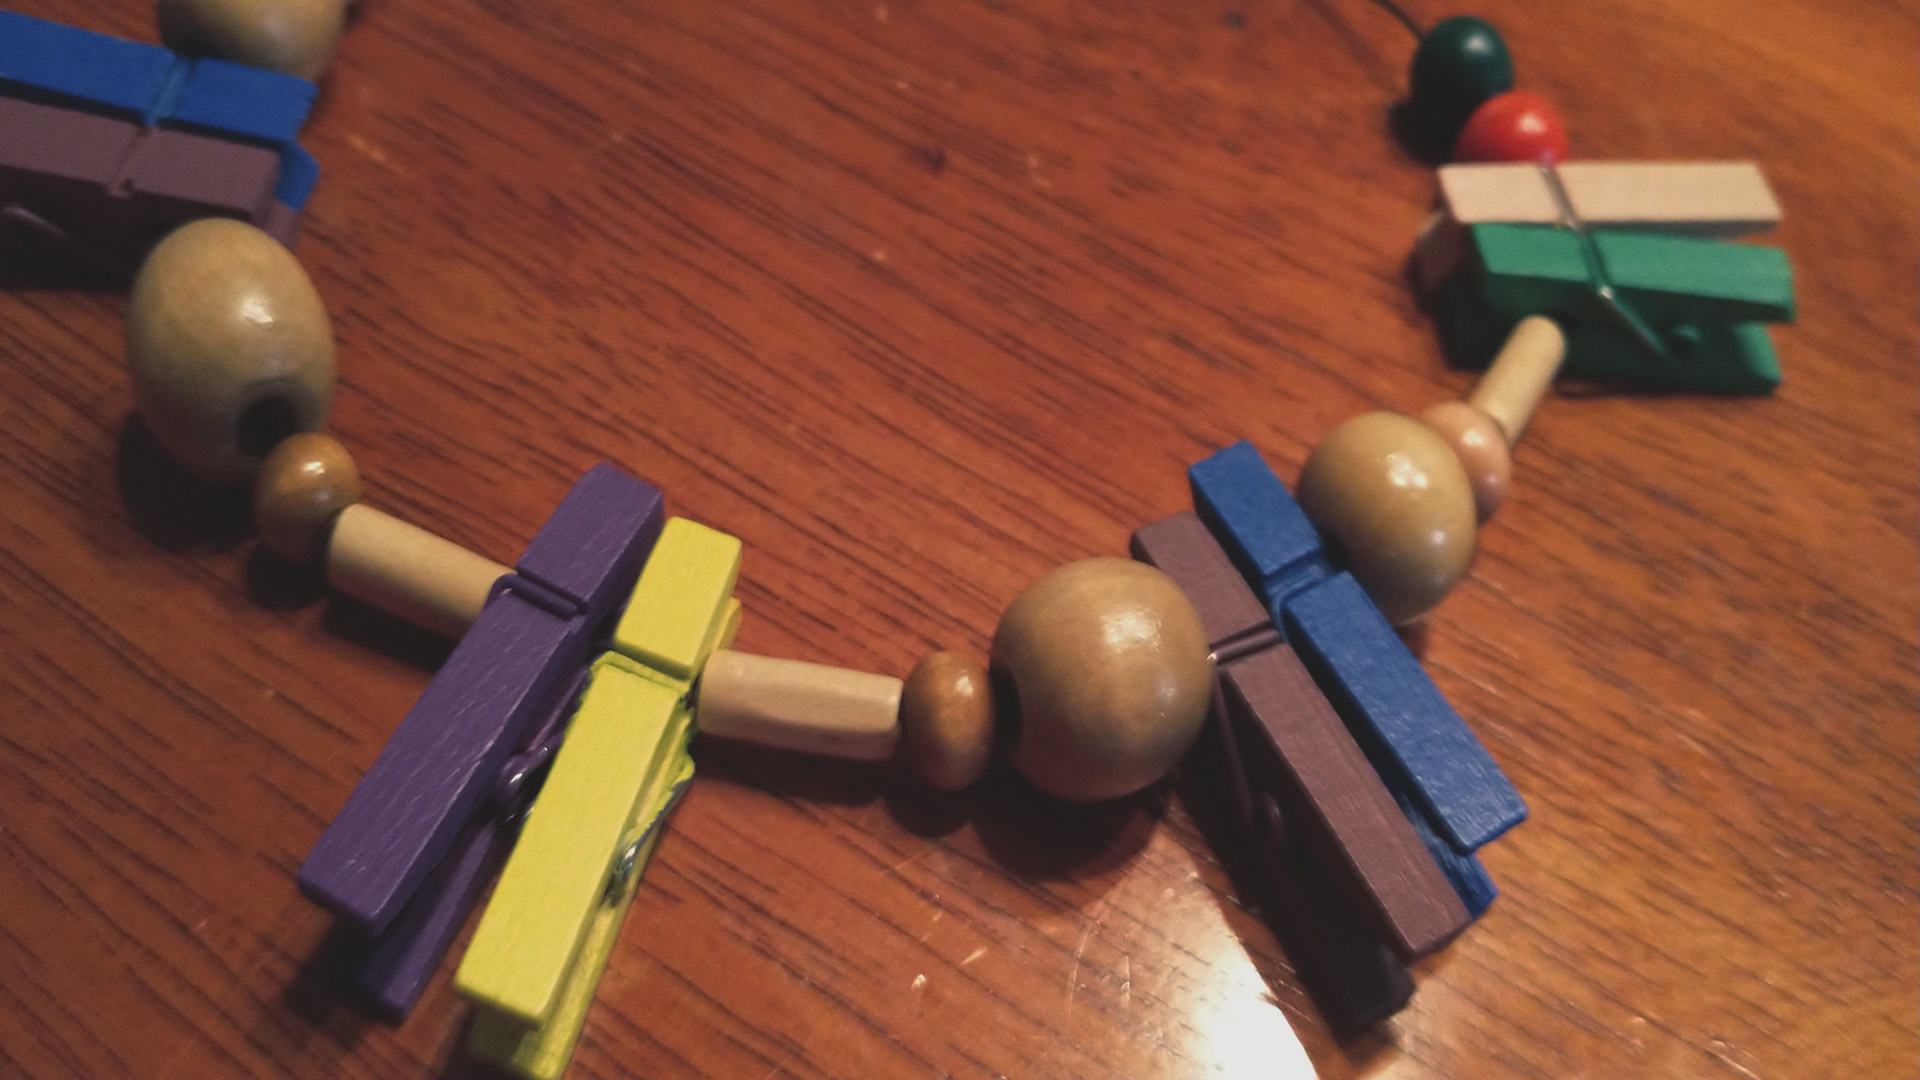 Closeup of handmade necklace made of different colored wooden beads and clothespins on a table